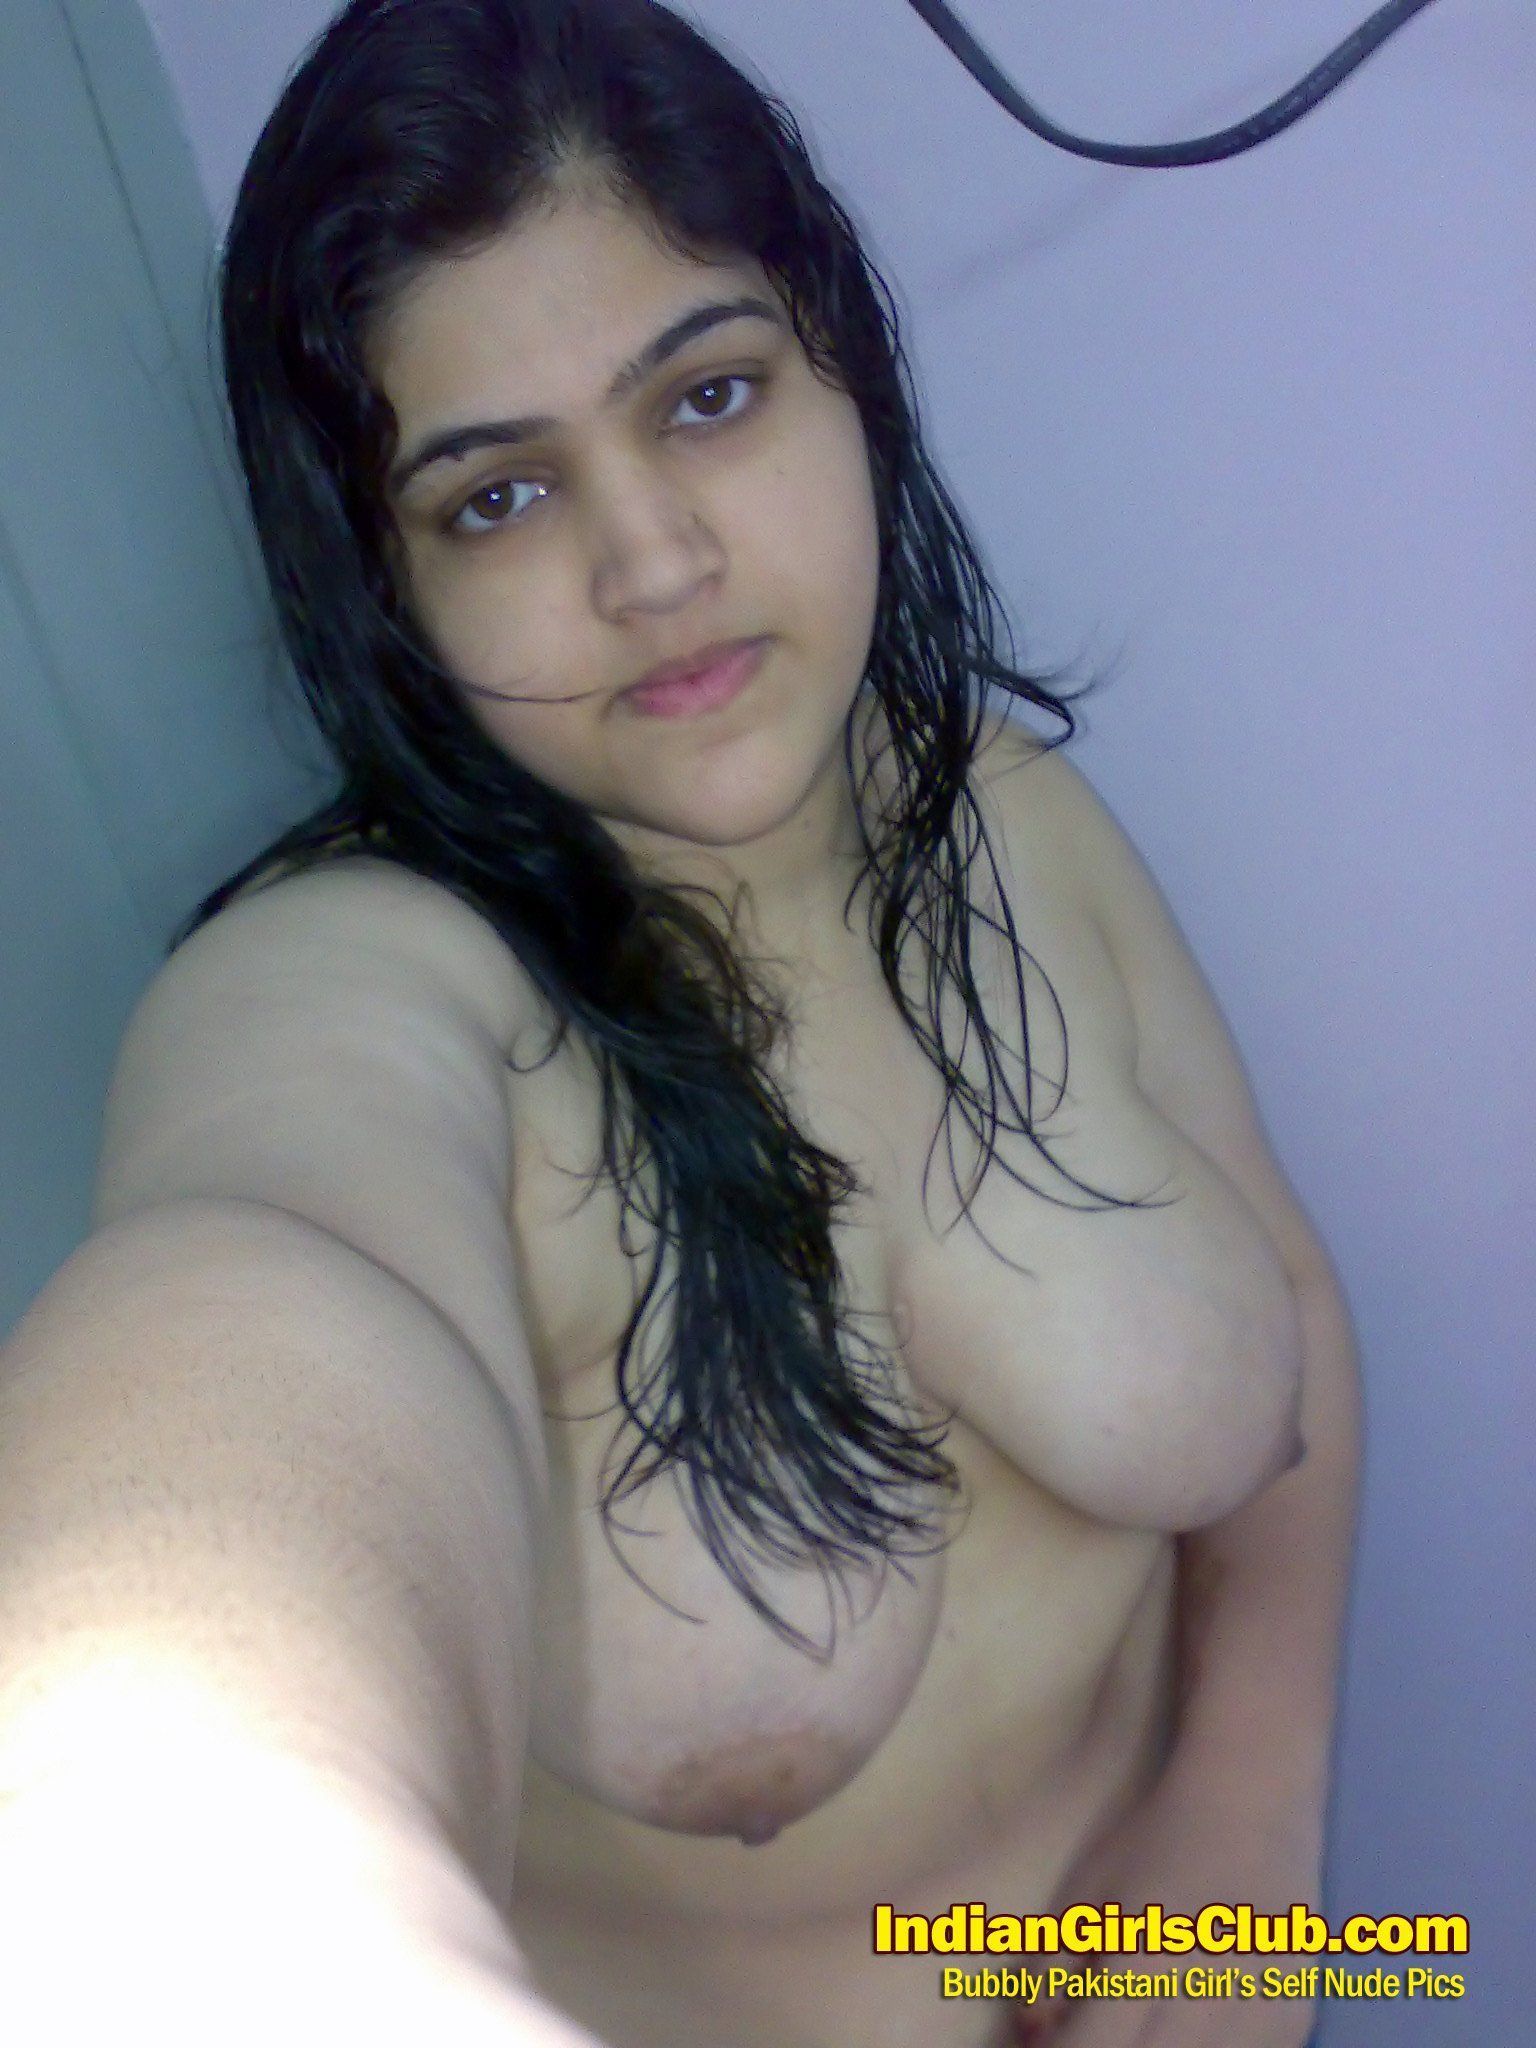 Pakistan online dating chat - Real Naked Girls